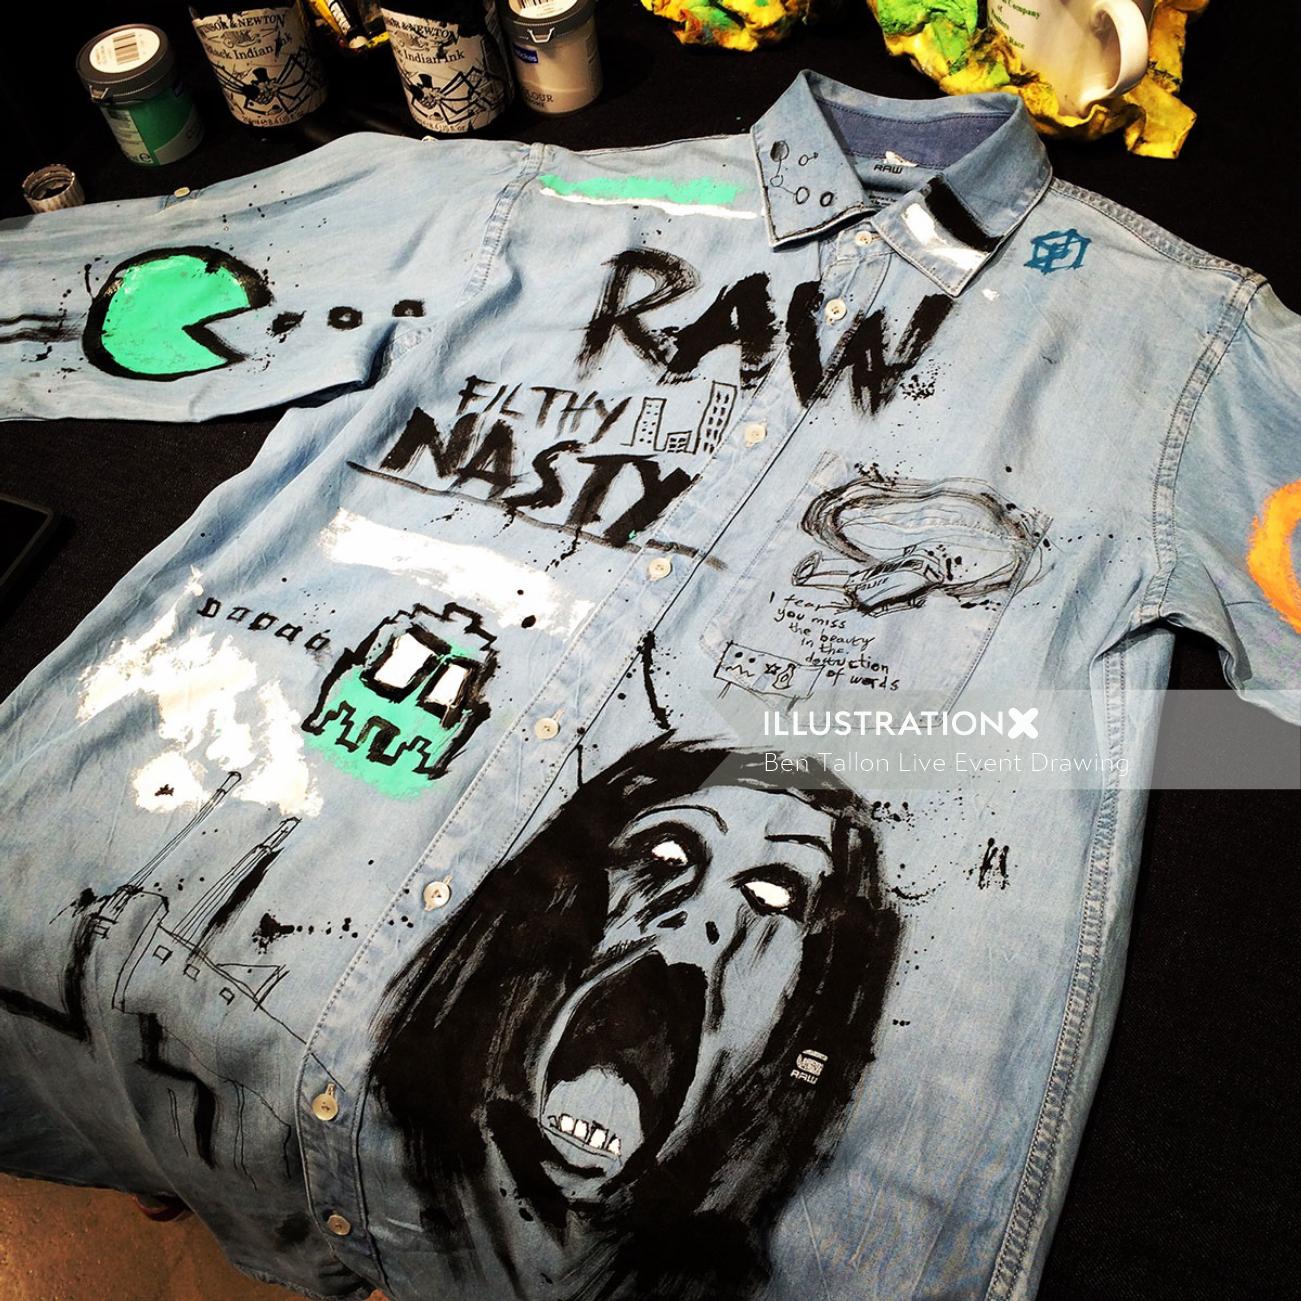 Live event drawing raw nasty on shirt
